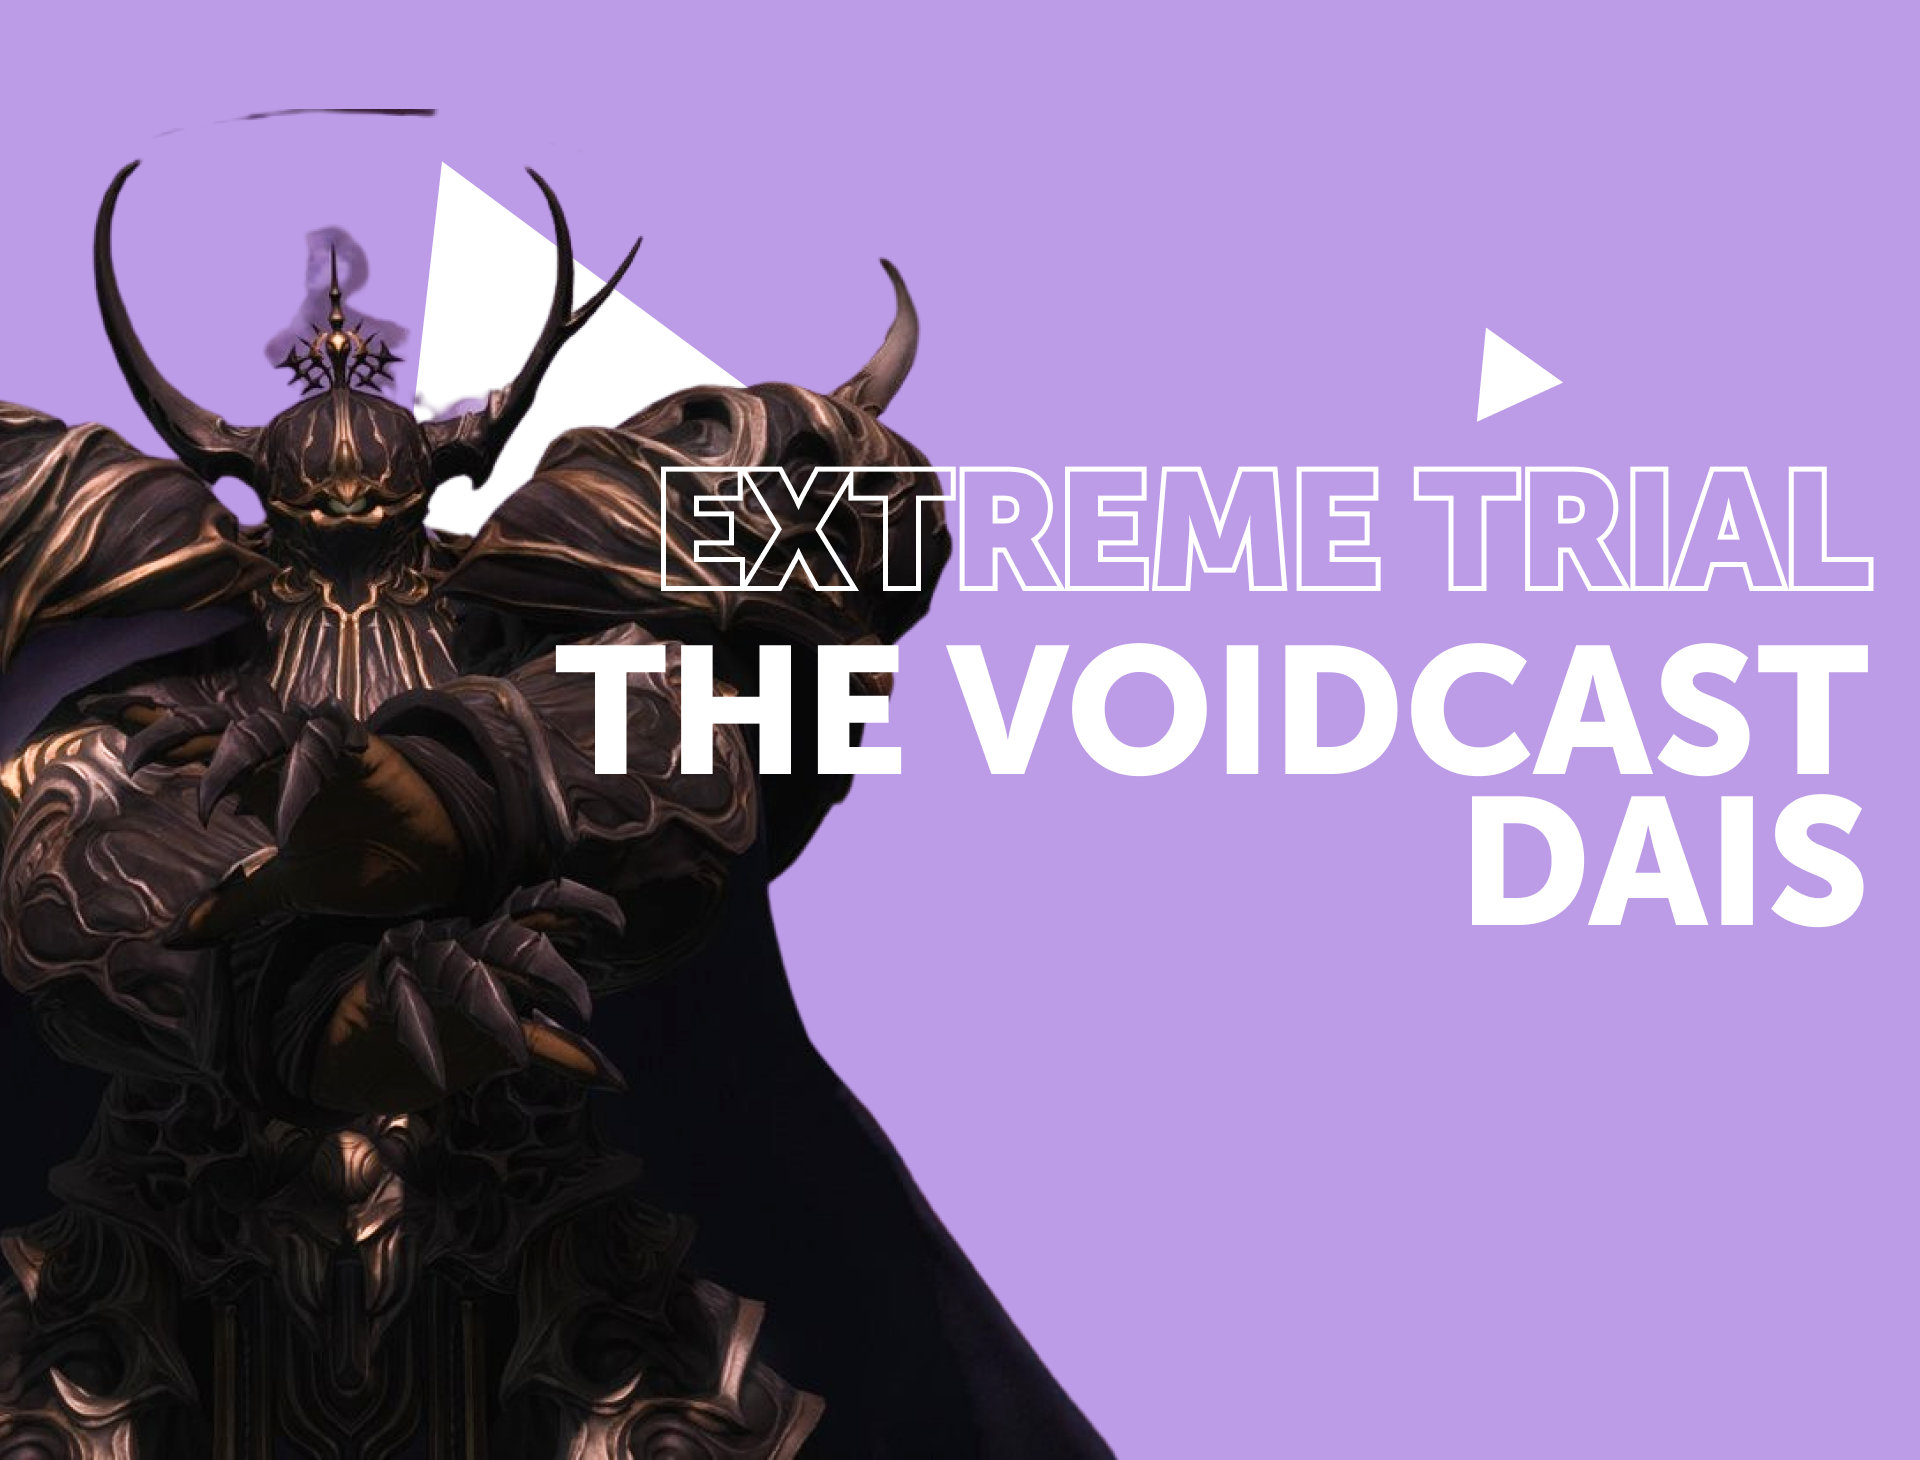 The Voidcast Dais - Extreme Trial